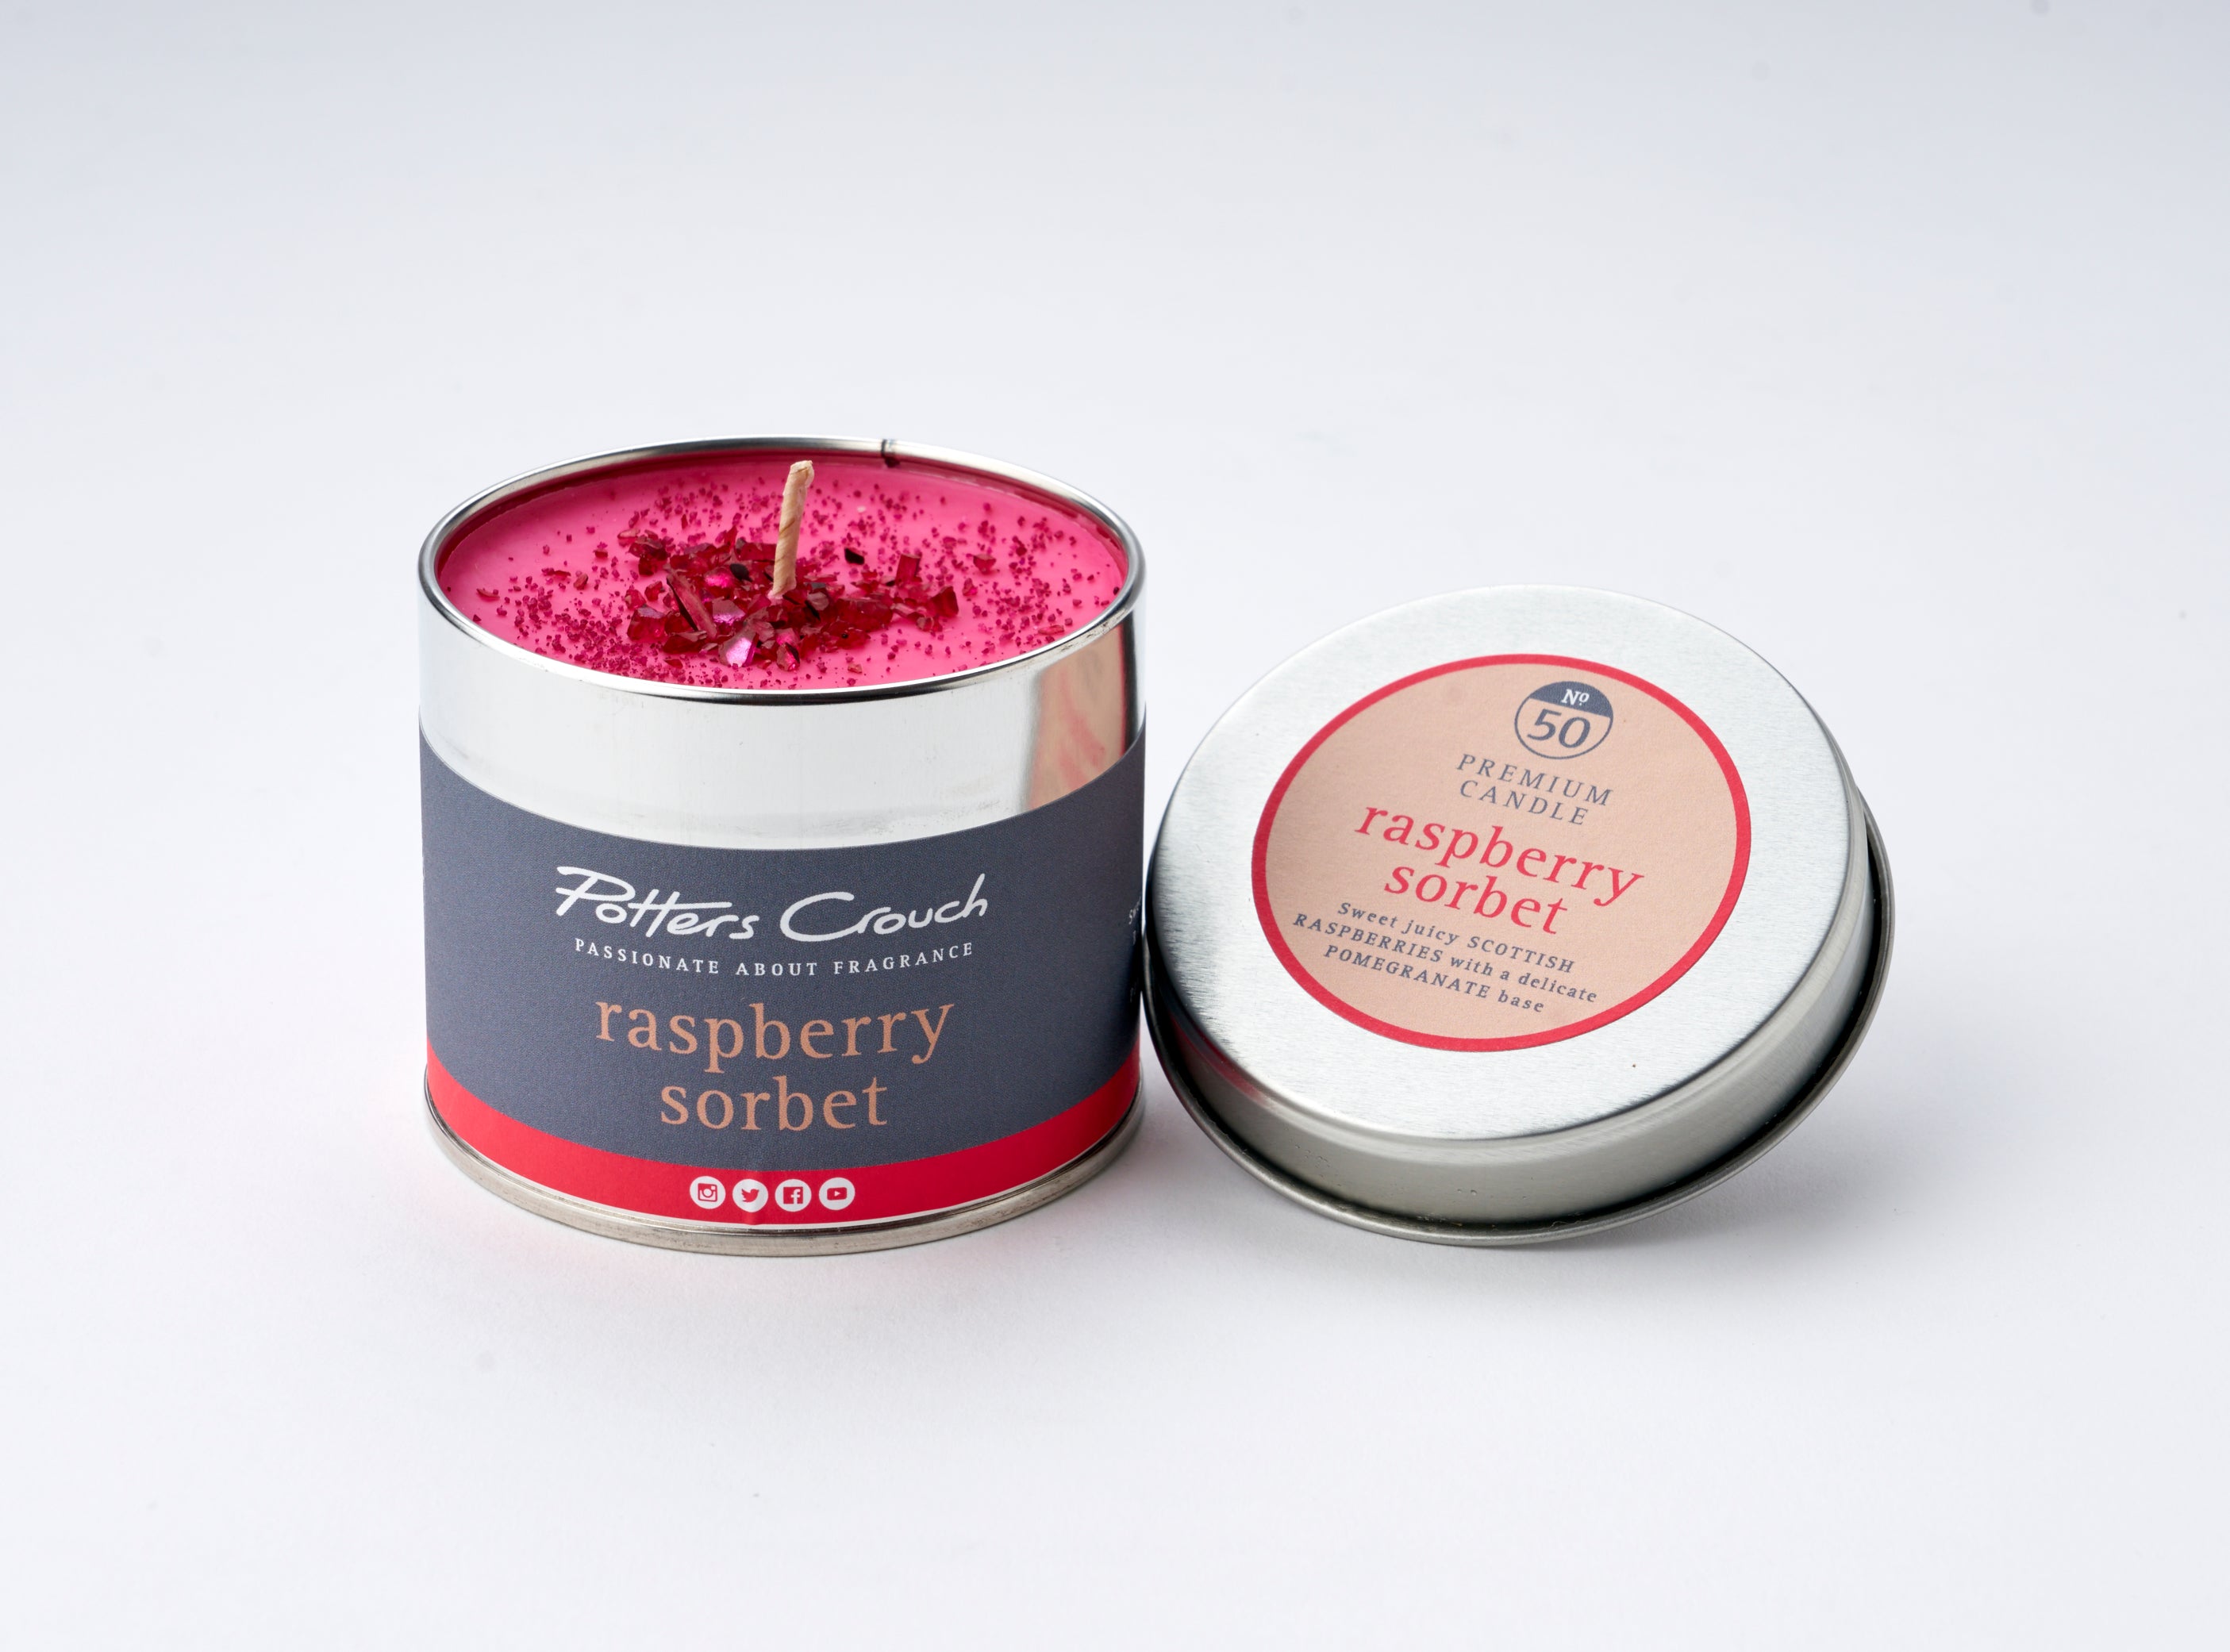 Raspberry Sorbet - Scented Candle in a Tin - Potters Crouch